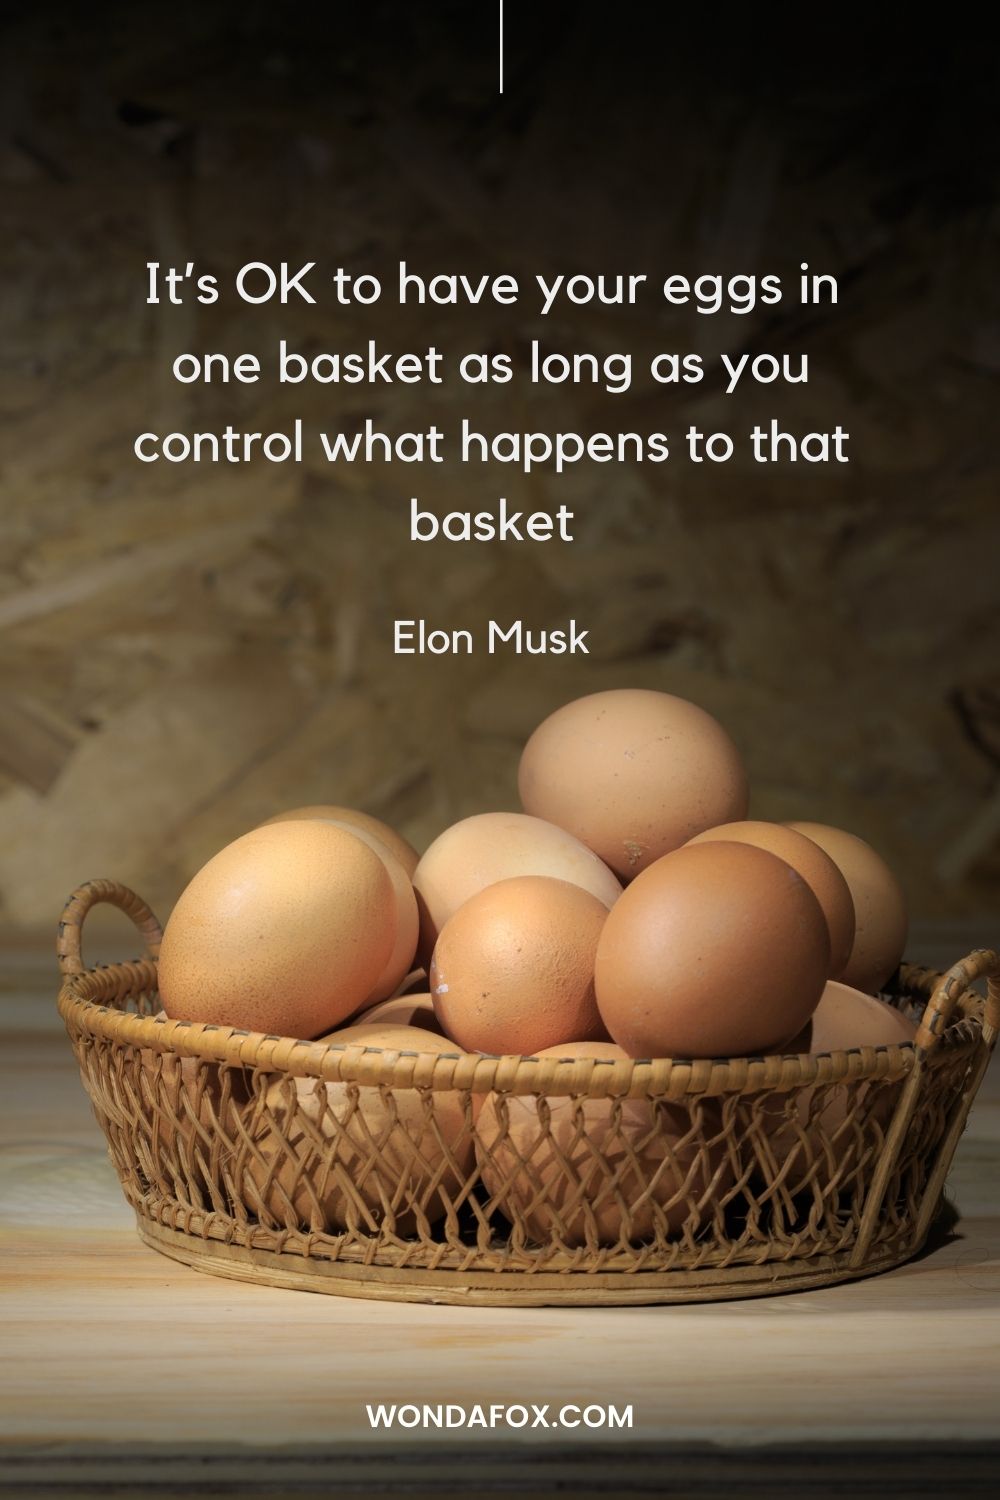 It’s OK to have your eggs in one basket as long as you control what happens to that basket